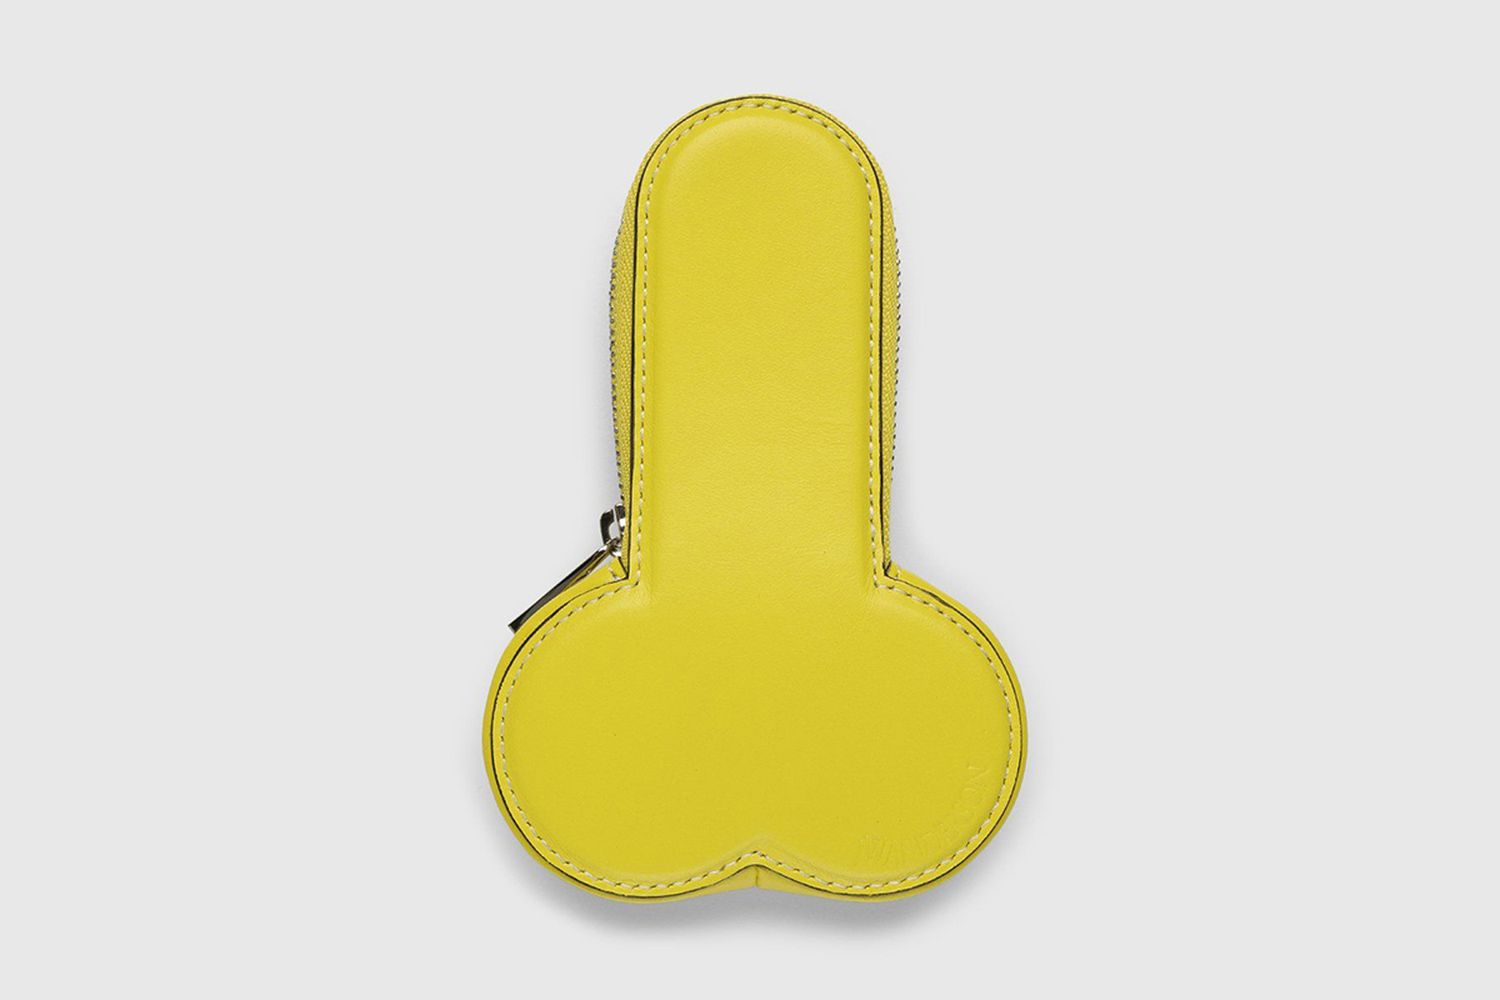 Penis Coin Purse